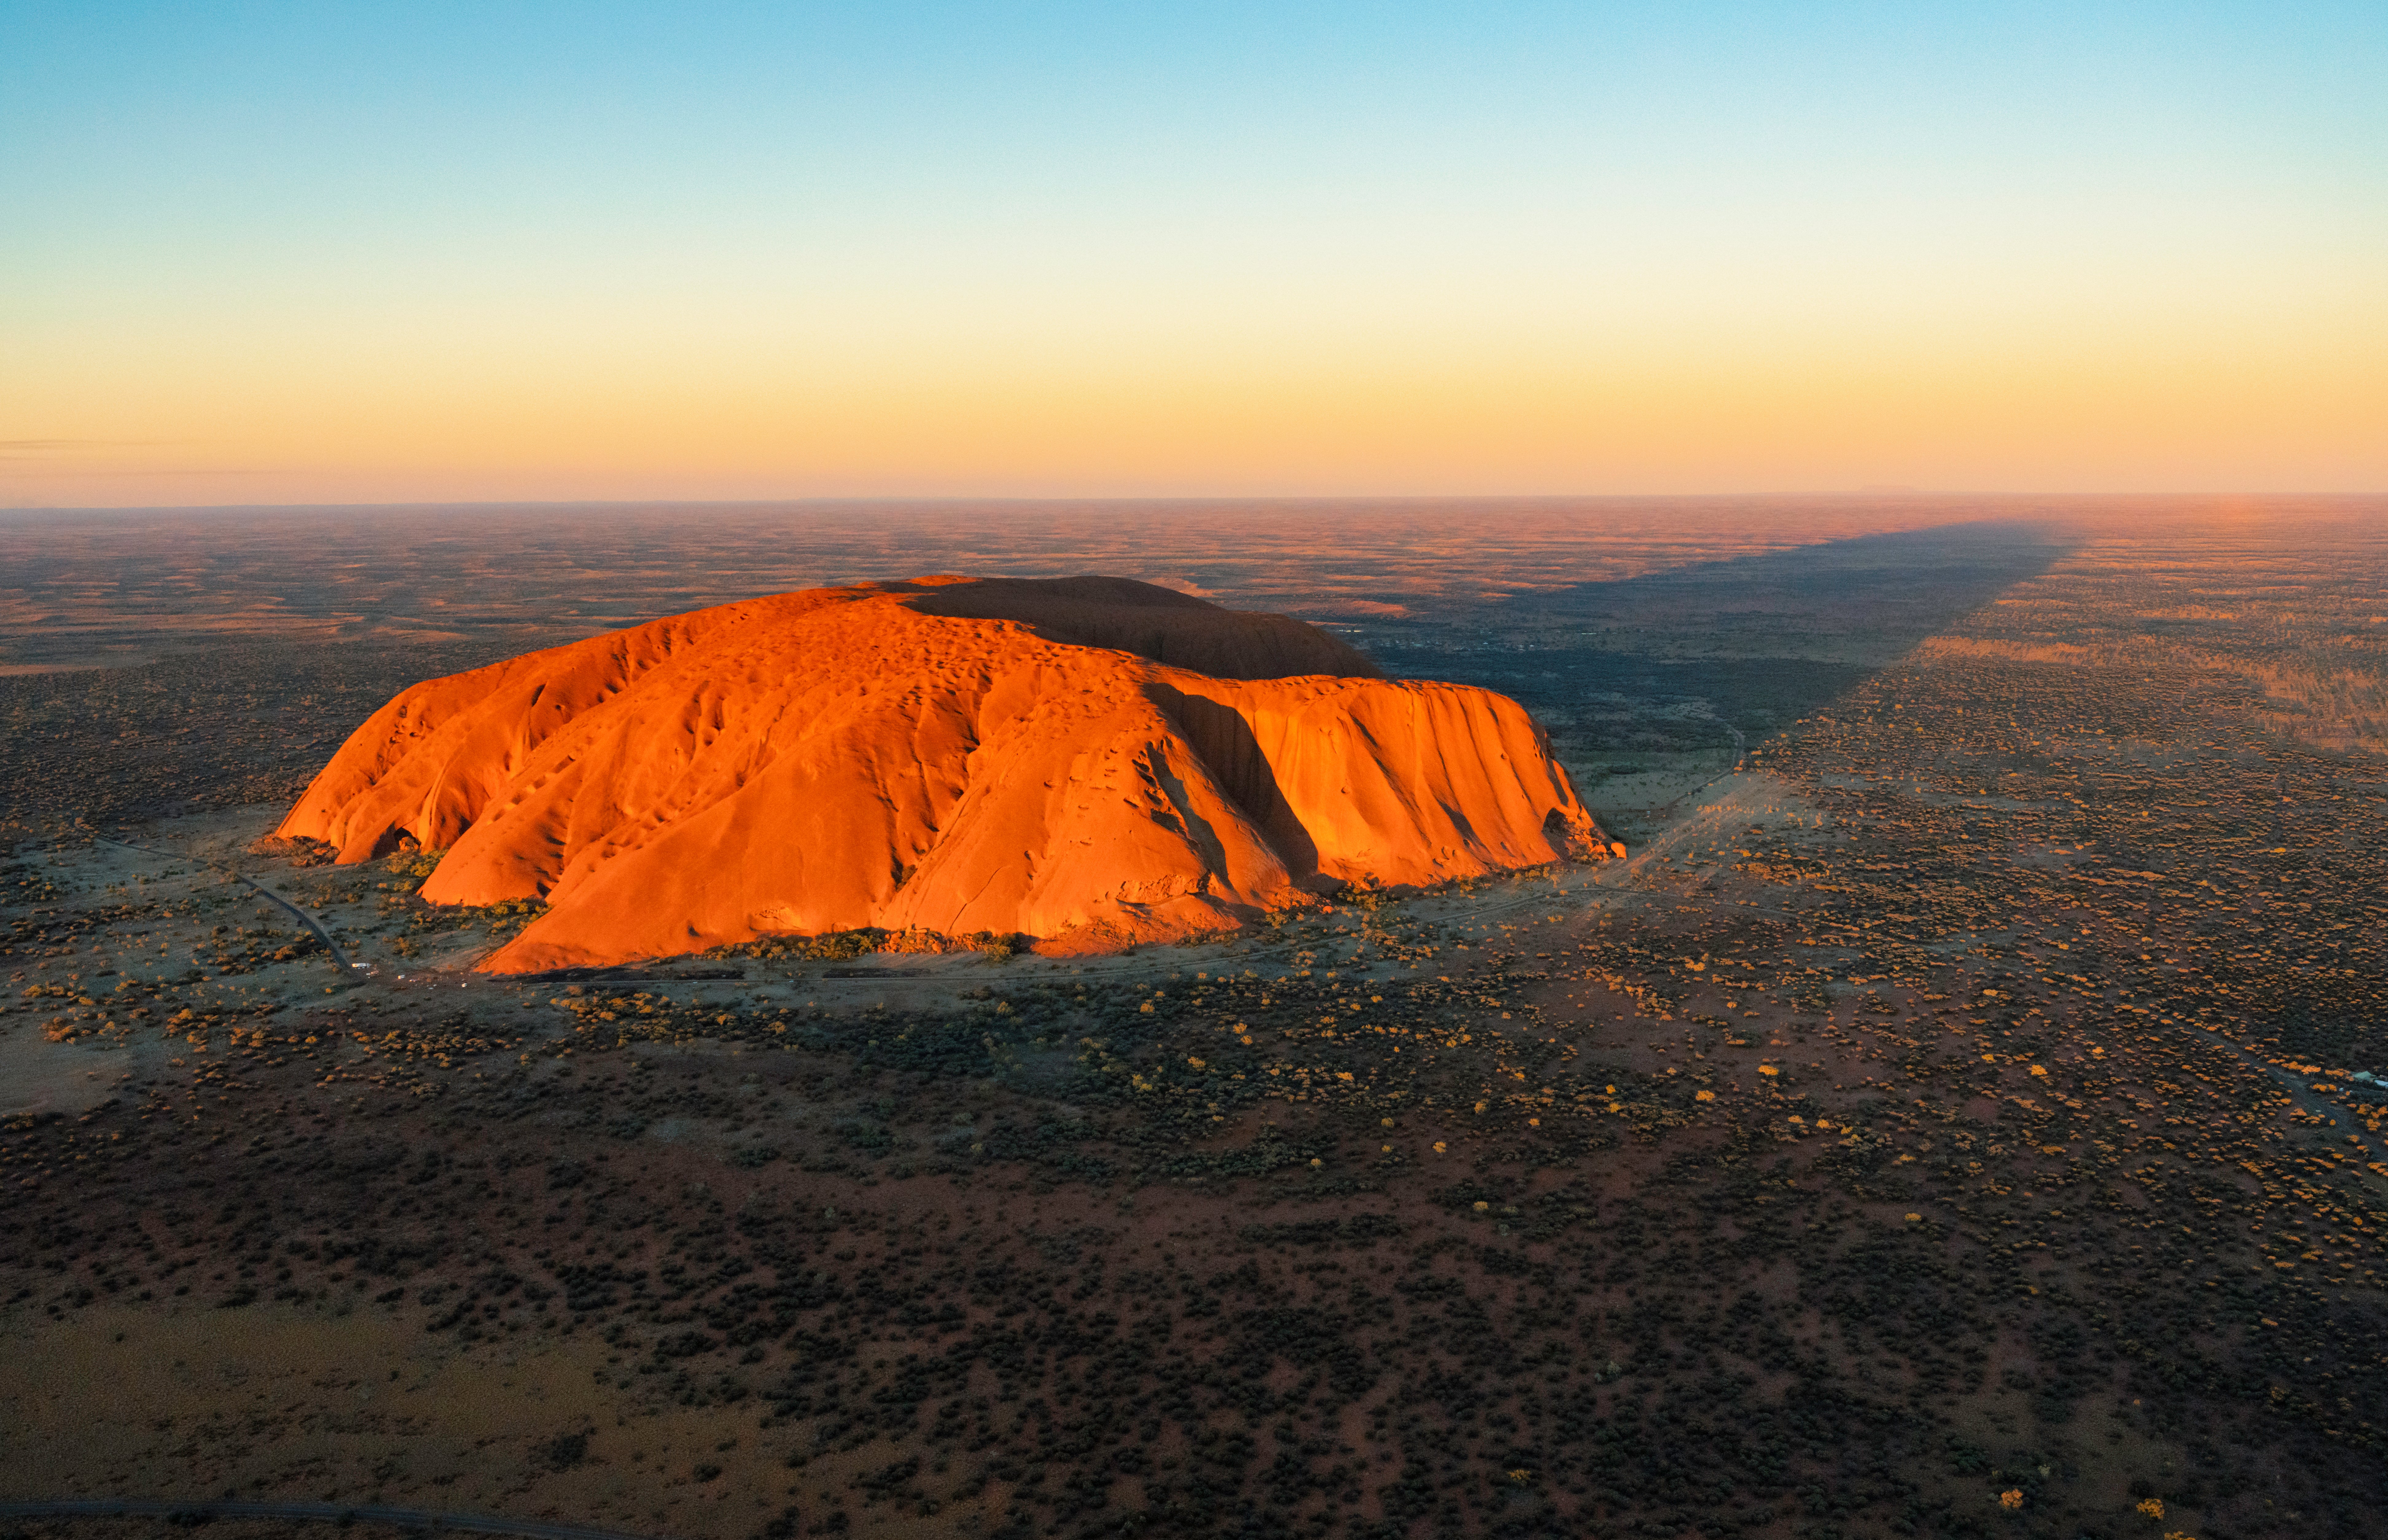 Darwin is a good alternative with easy access to the magnificent Uluru